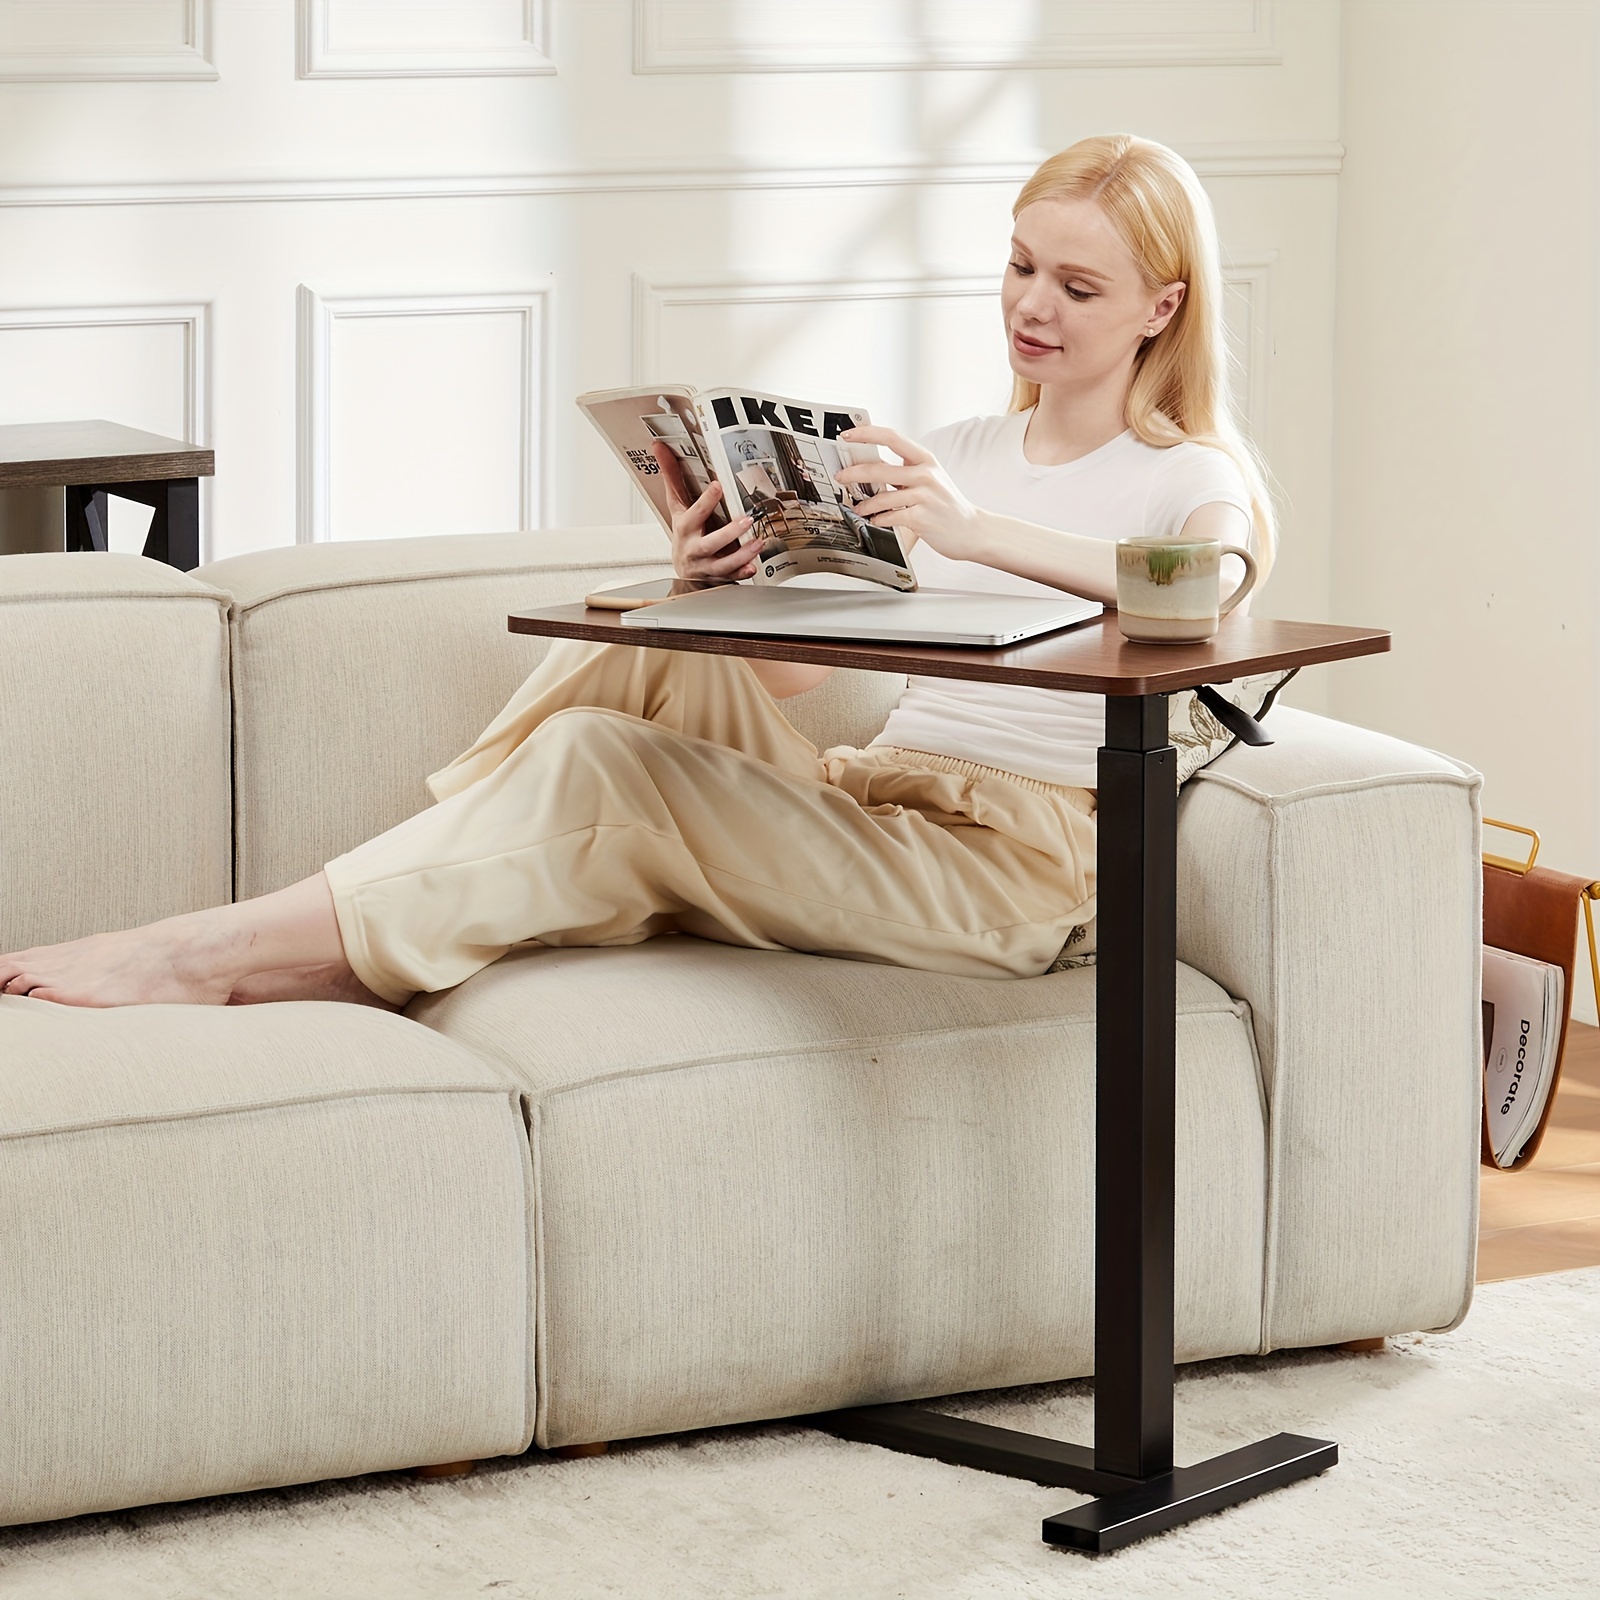 

Adjustable Overbed Bedside Table With Wheels, Hospital & Home Use Bed Table, Rolling Laptop Table, Mobile Standing Desk